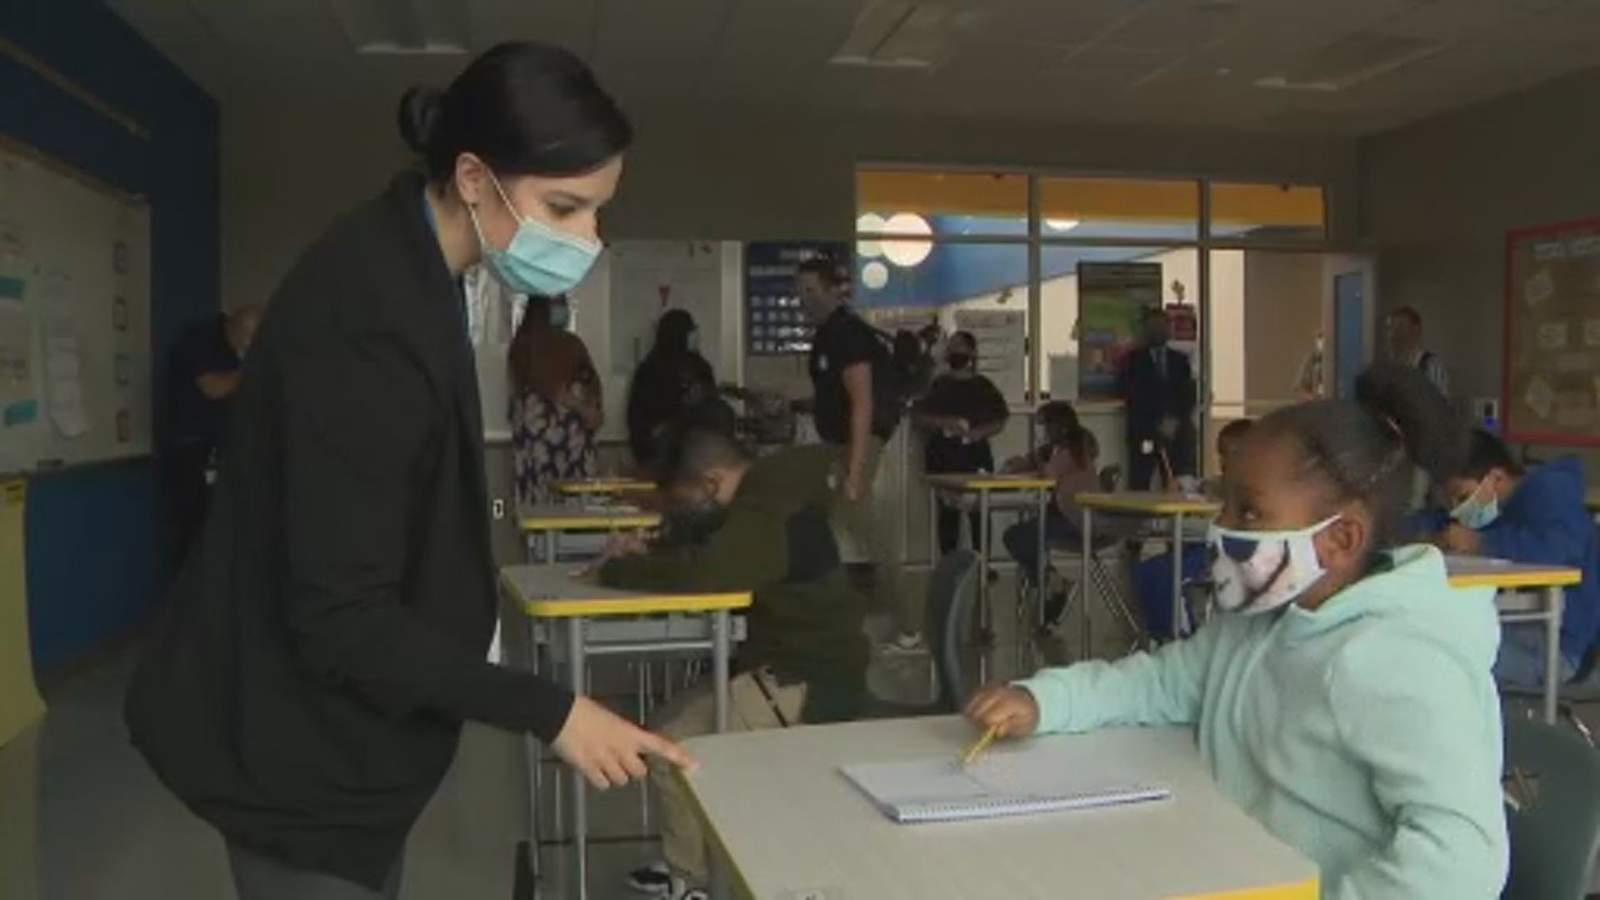 Free mental health counseling services offered as teachers face mounting pandemic stress